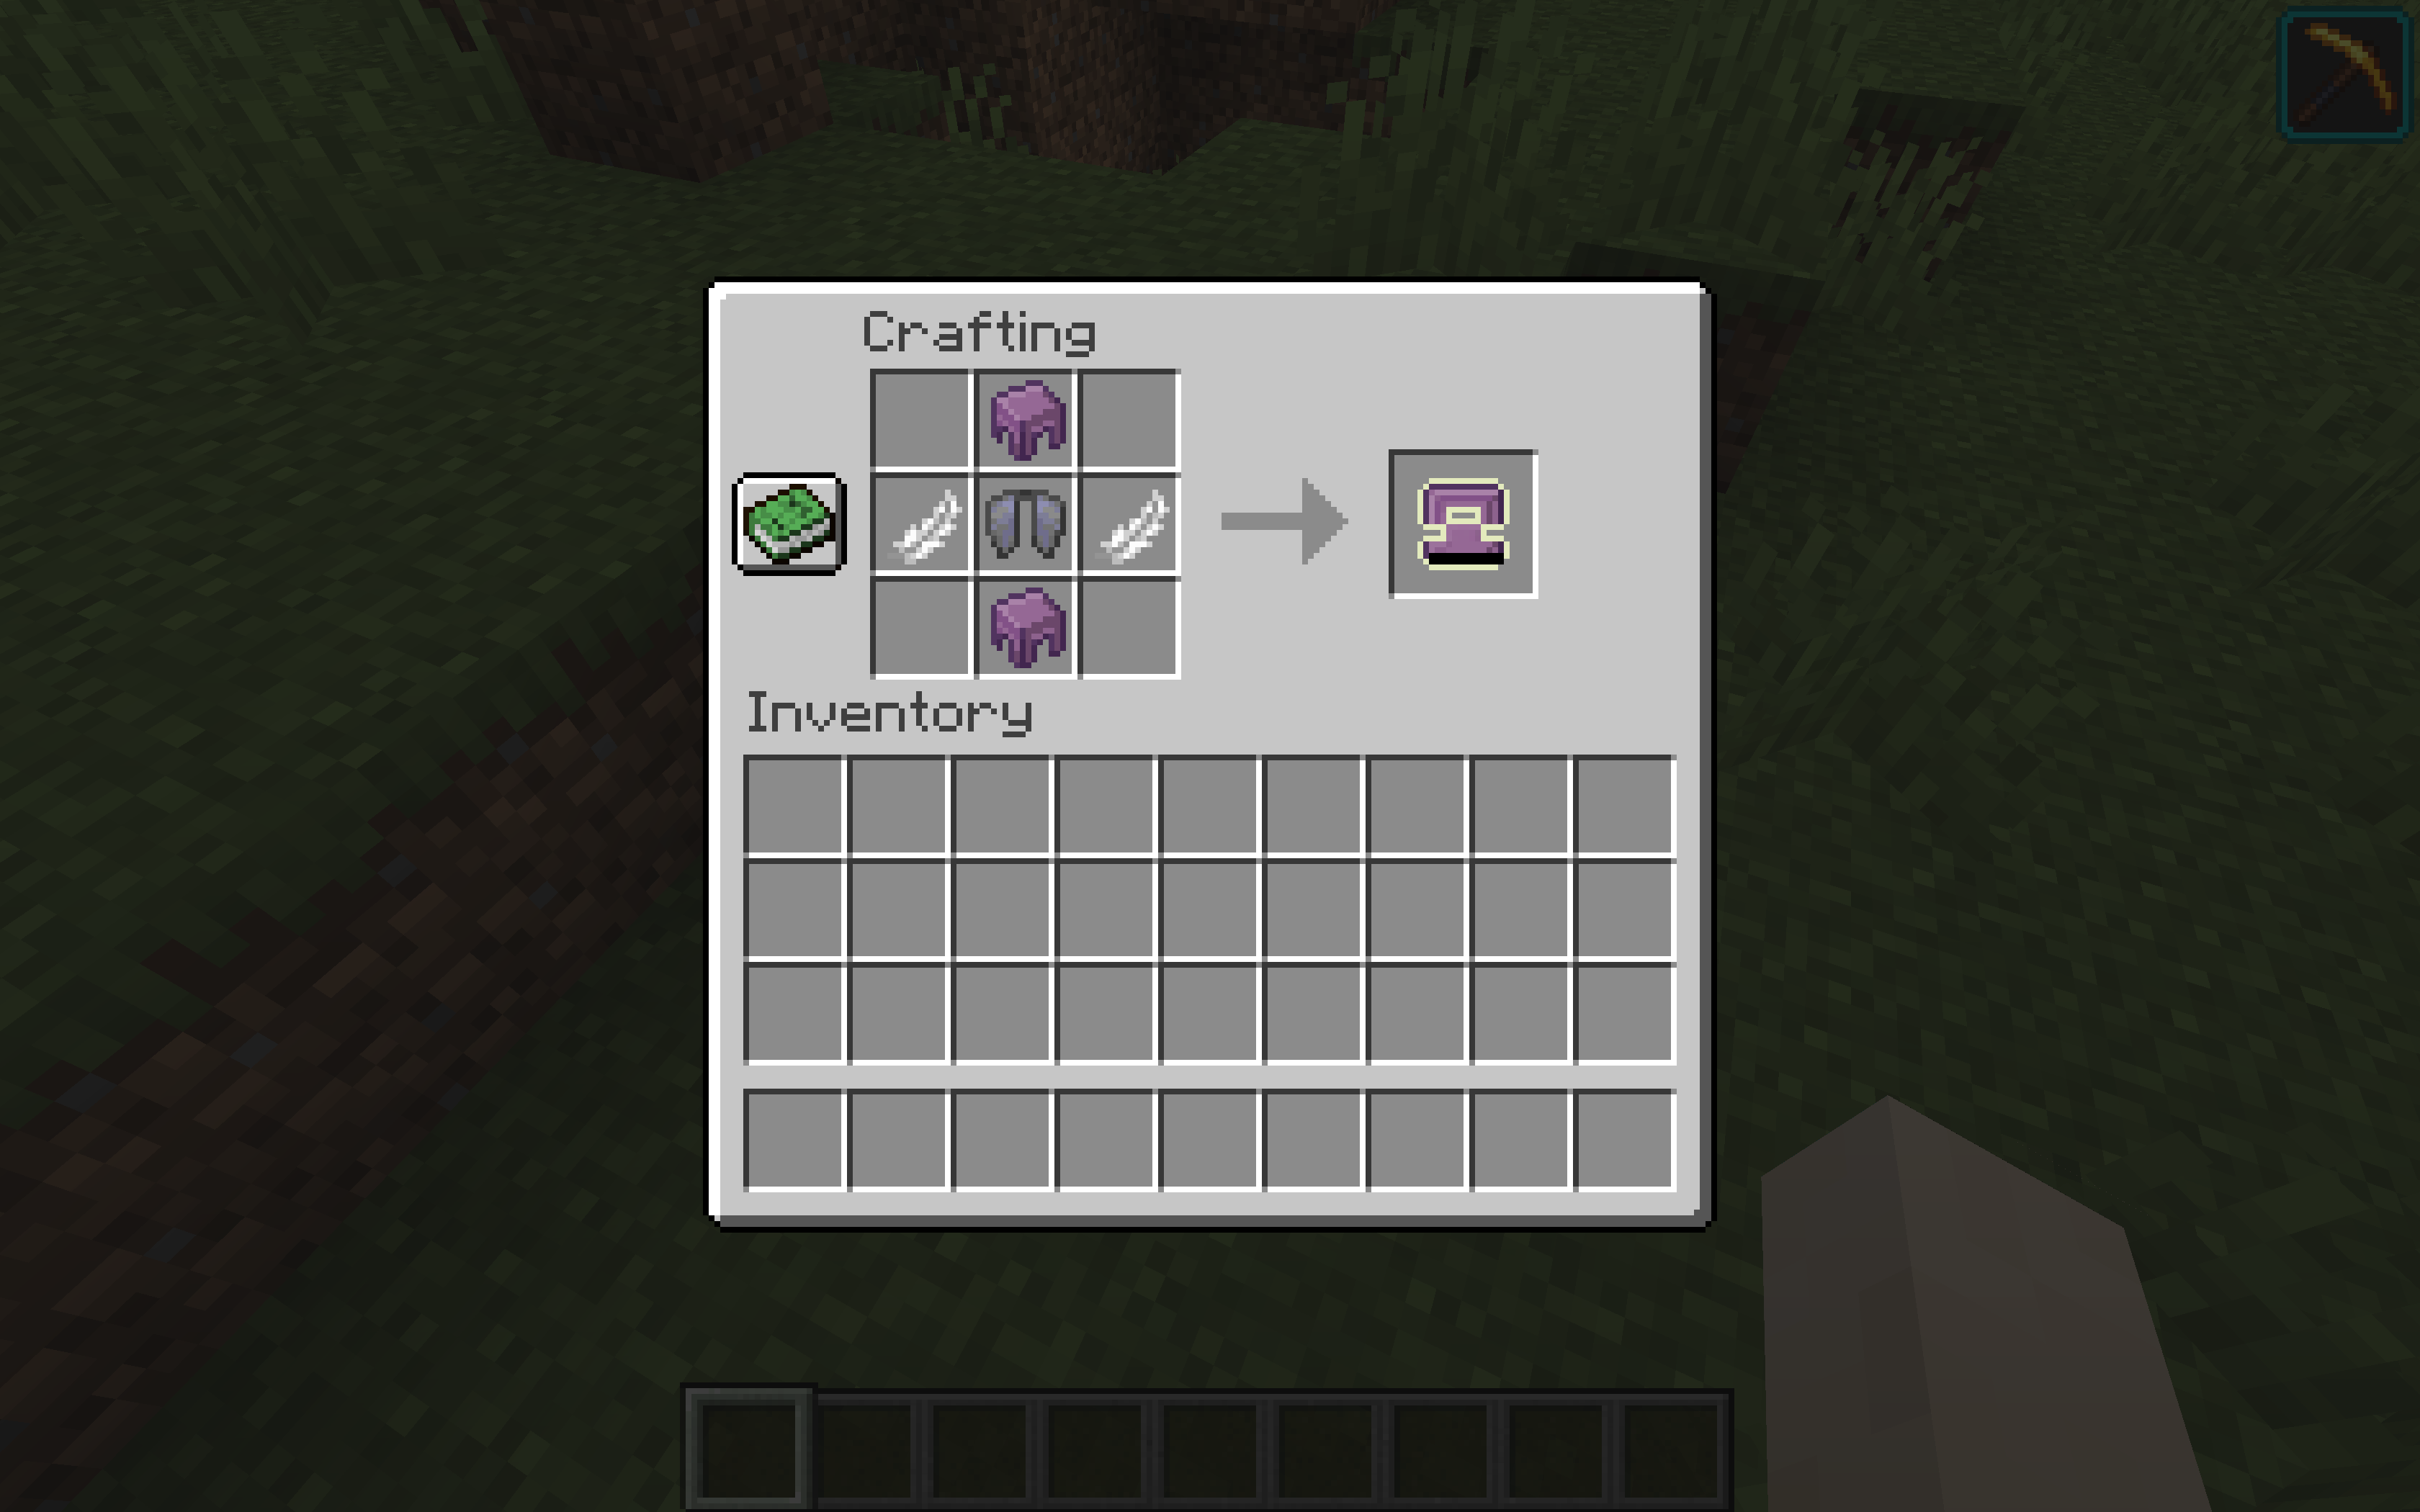 Crafting a Shulker Charm